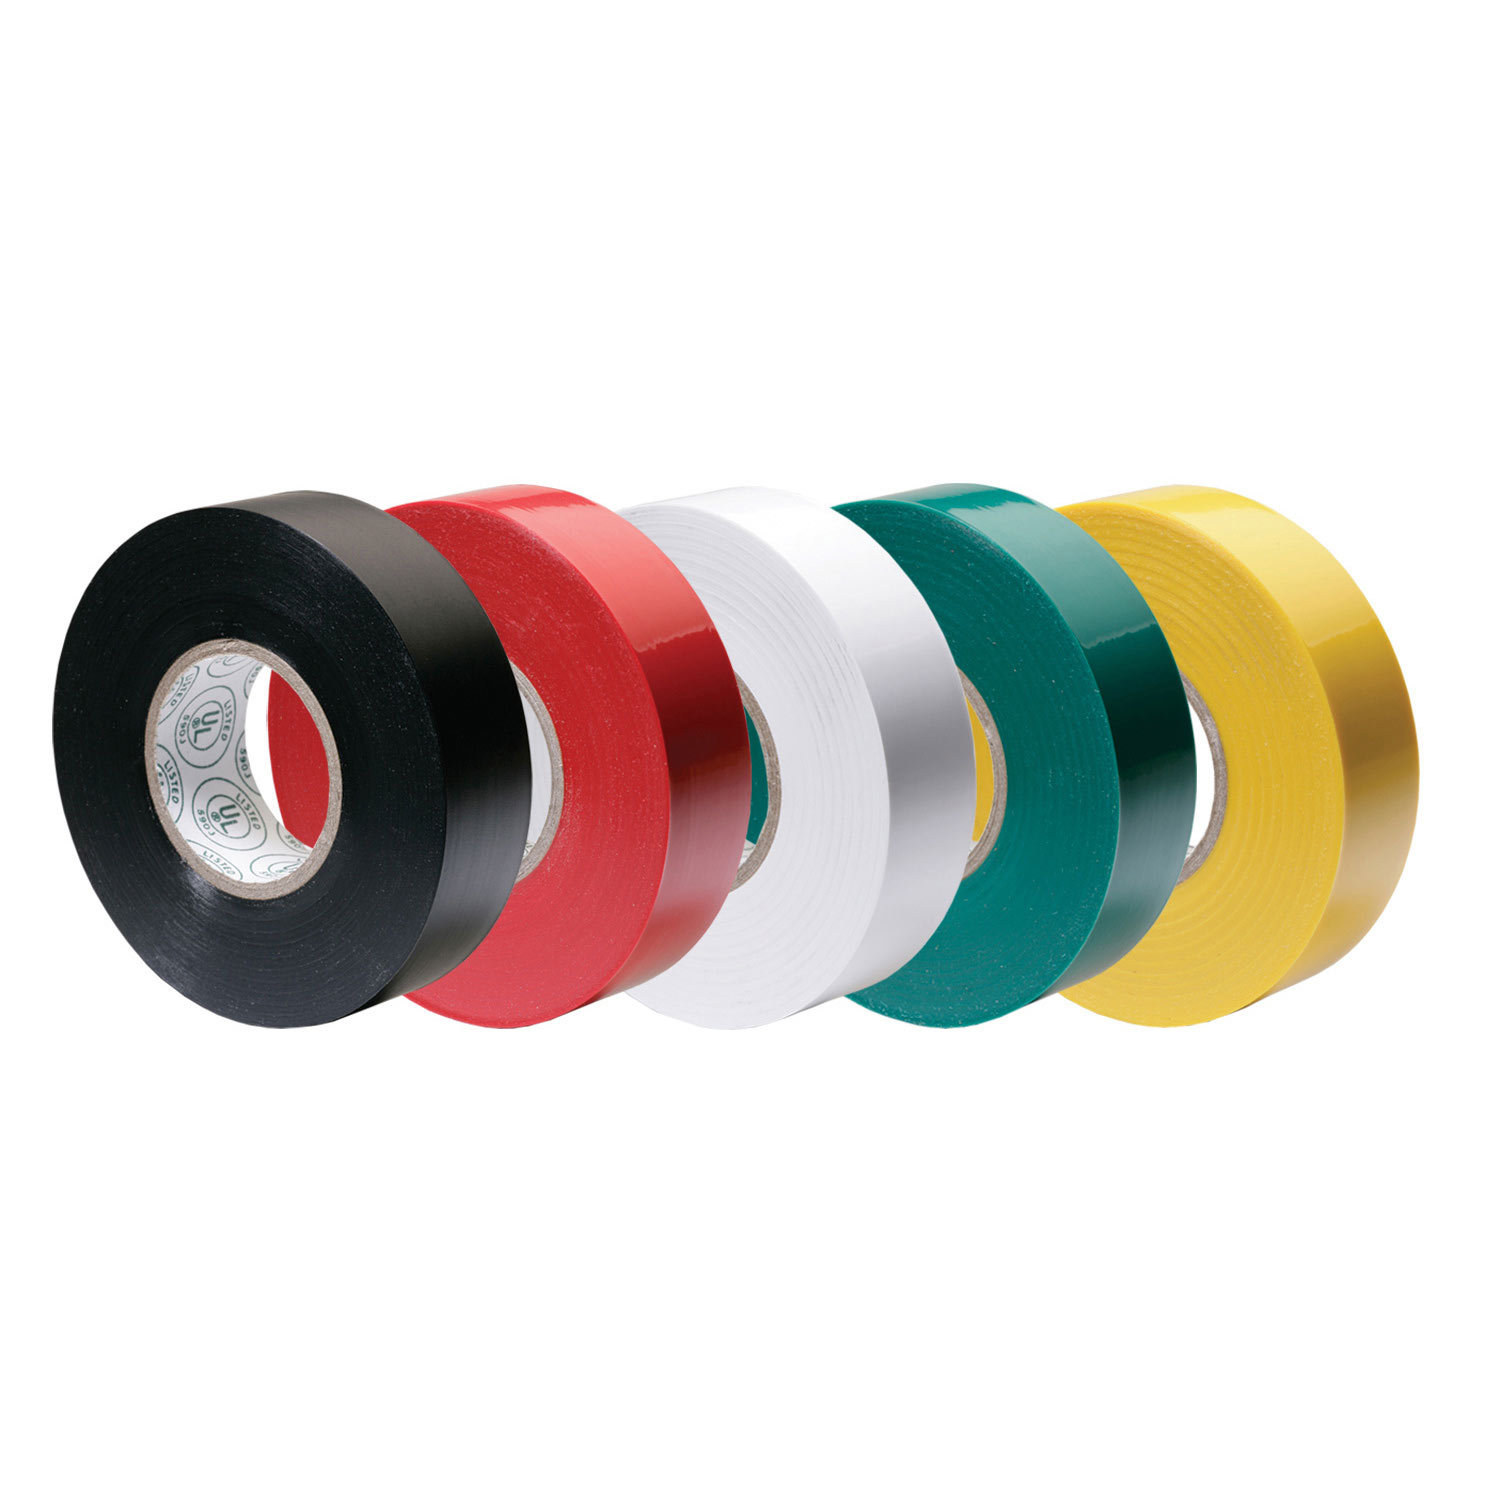 ANCOR White Electrical Tape, 3/4